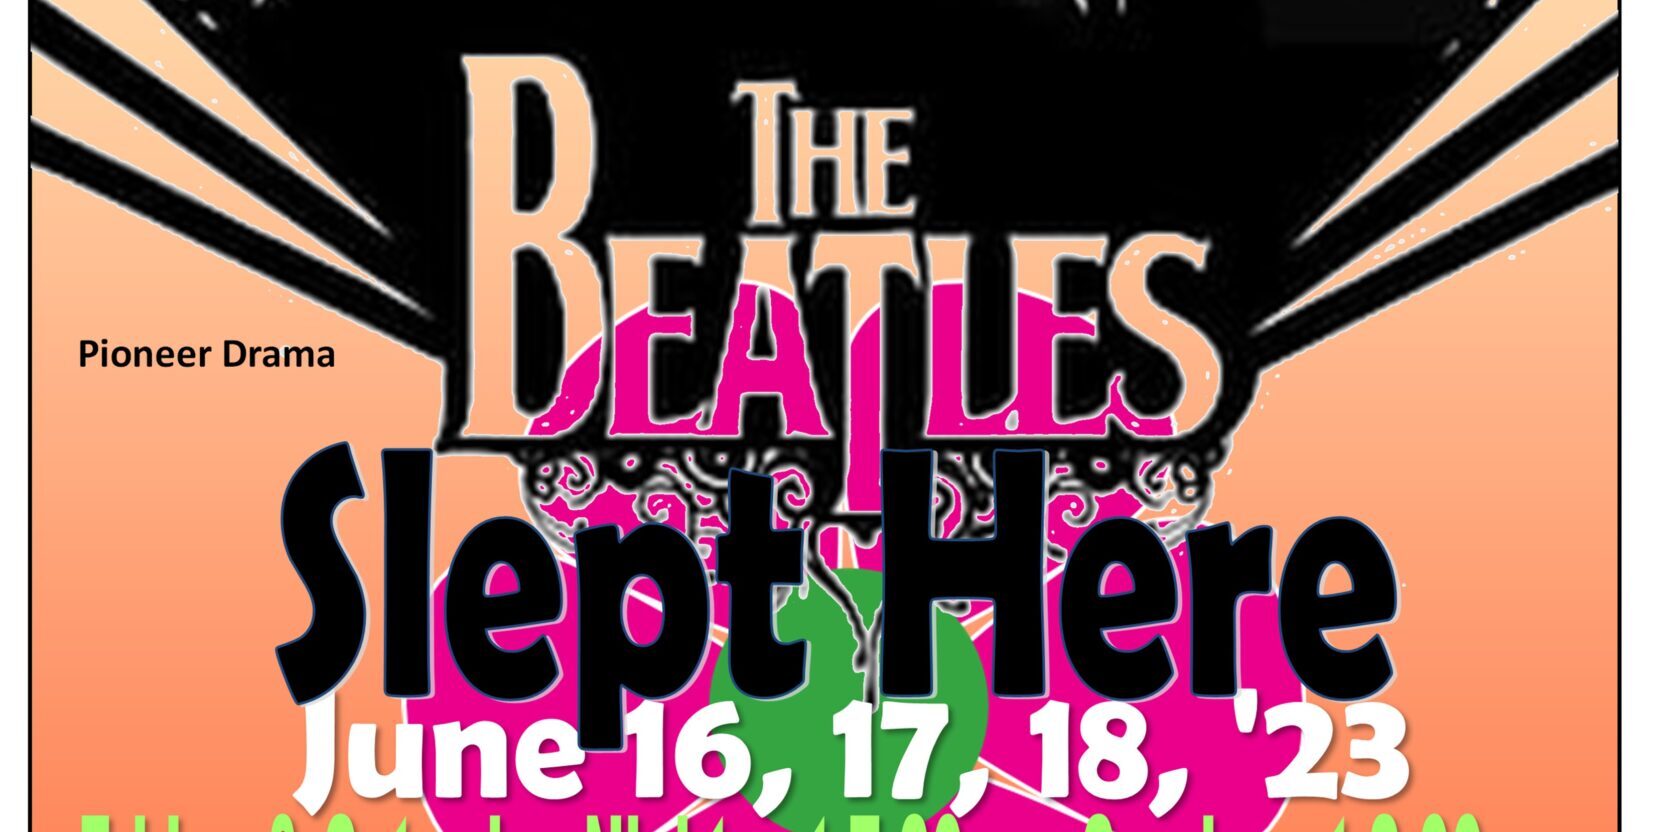 Art Center Youth Theatre Presents: The Beatles Slept Here